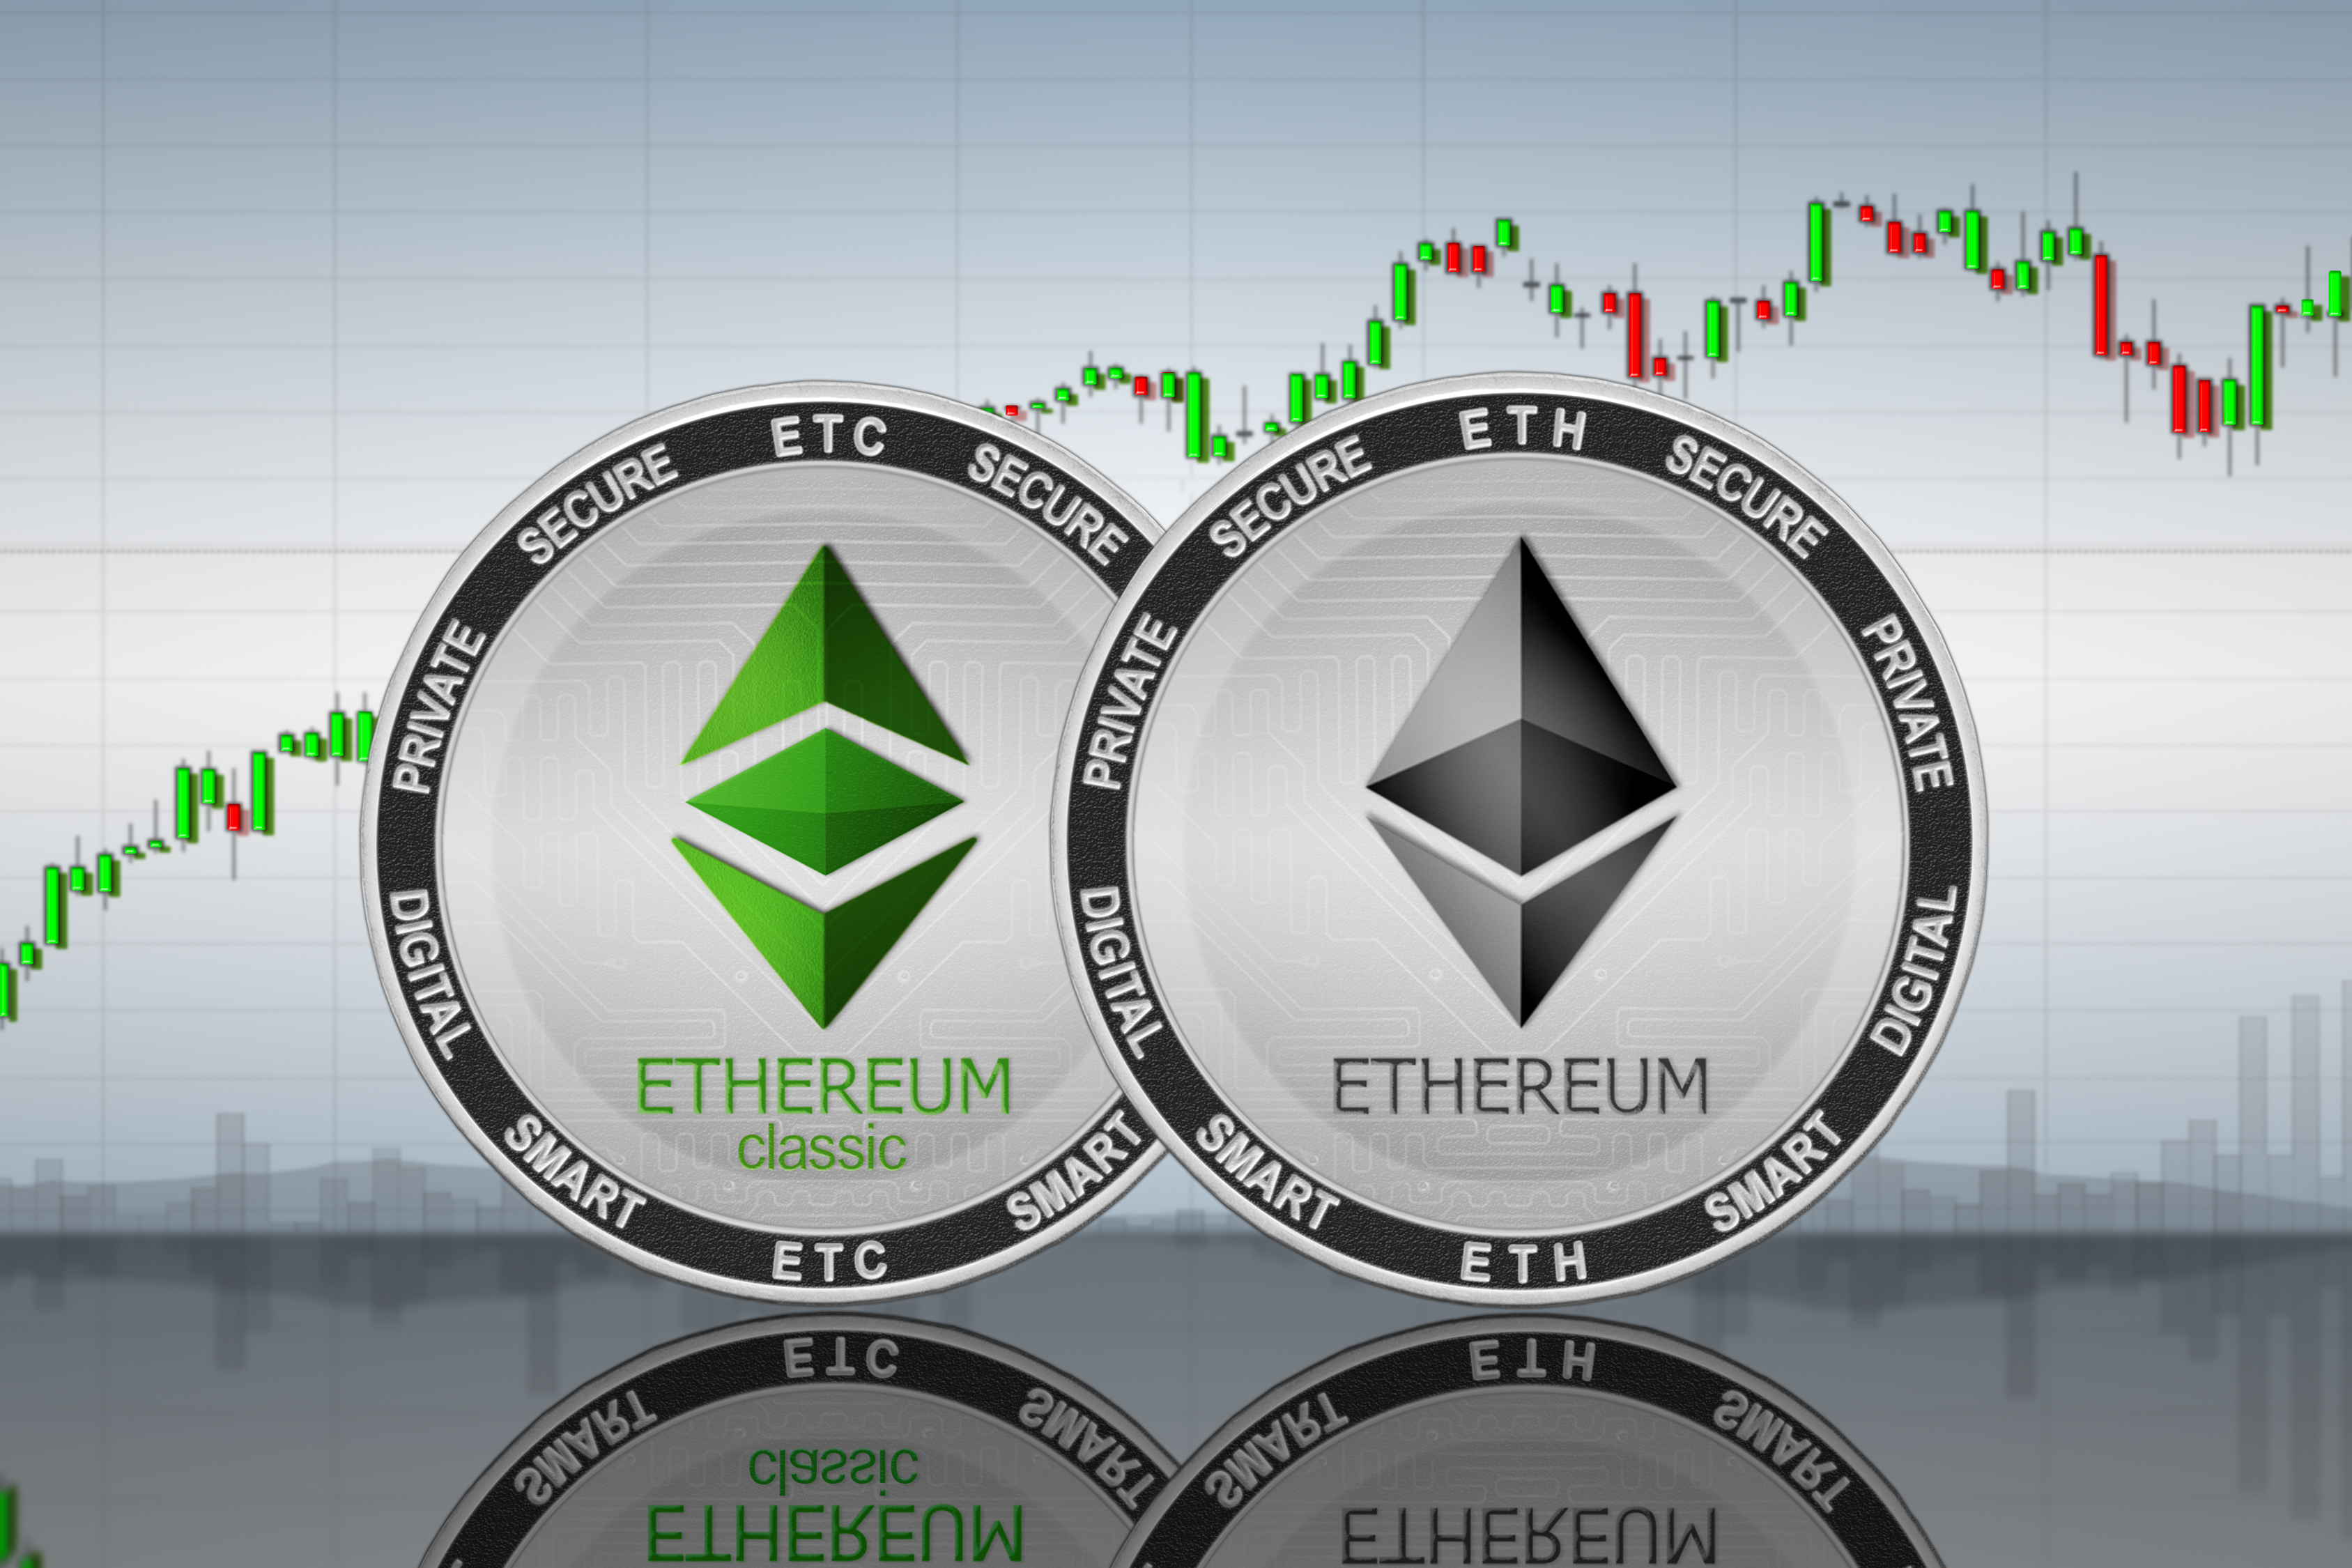 How Much Will Ethereum Classic Be Worth In 2021 : Ethereum Wikipedia - The next ethereum price prediction 2021 i wanted to discuss was by a prediction service called longforecast.